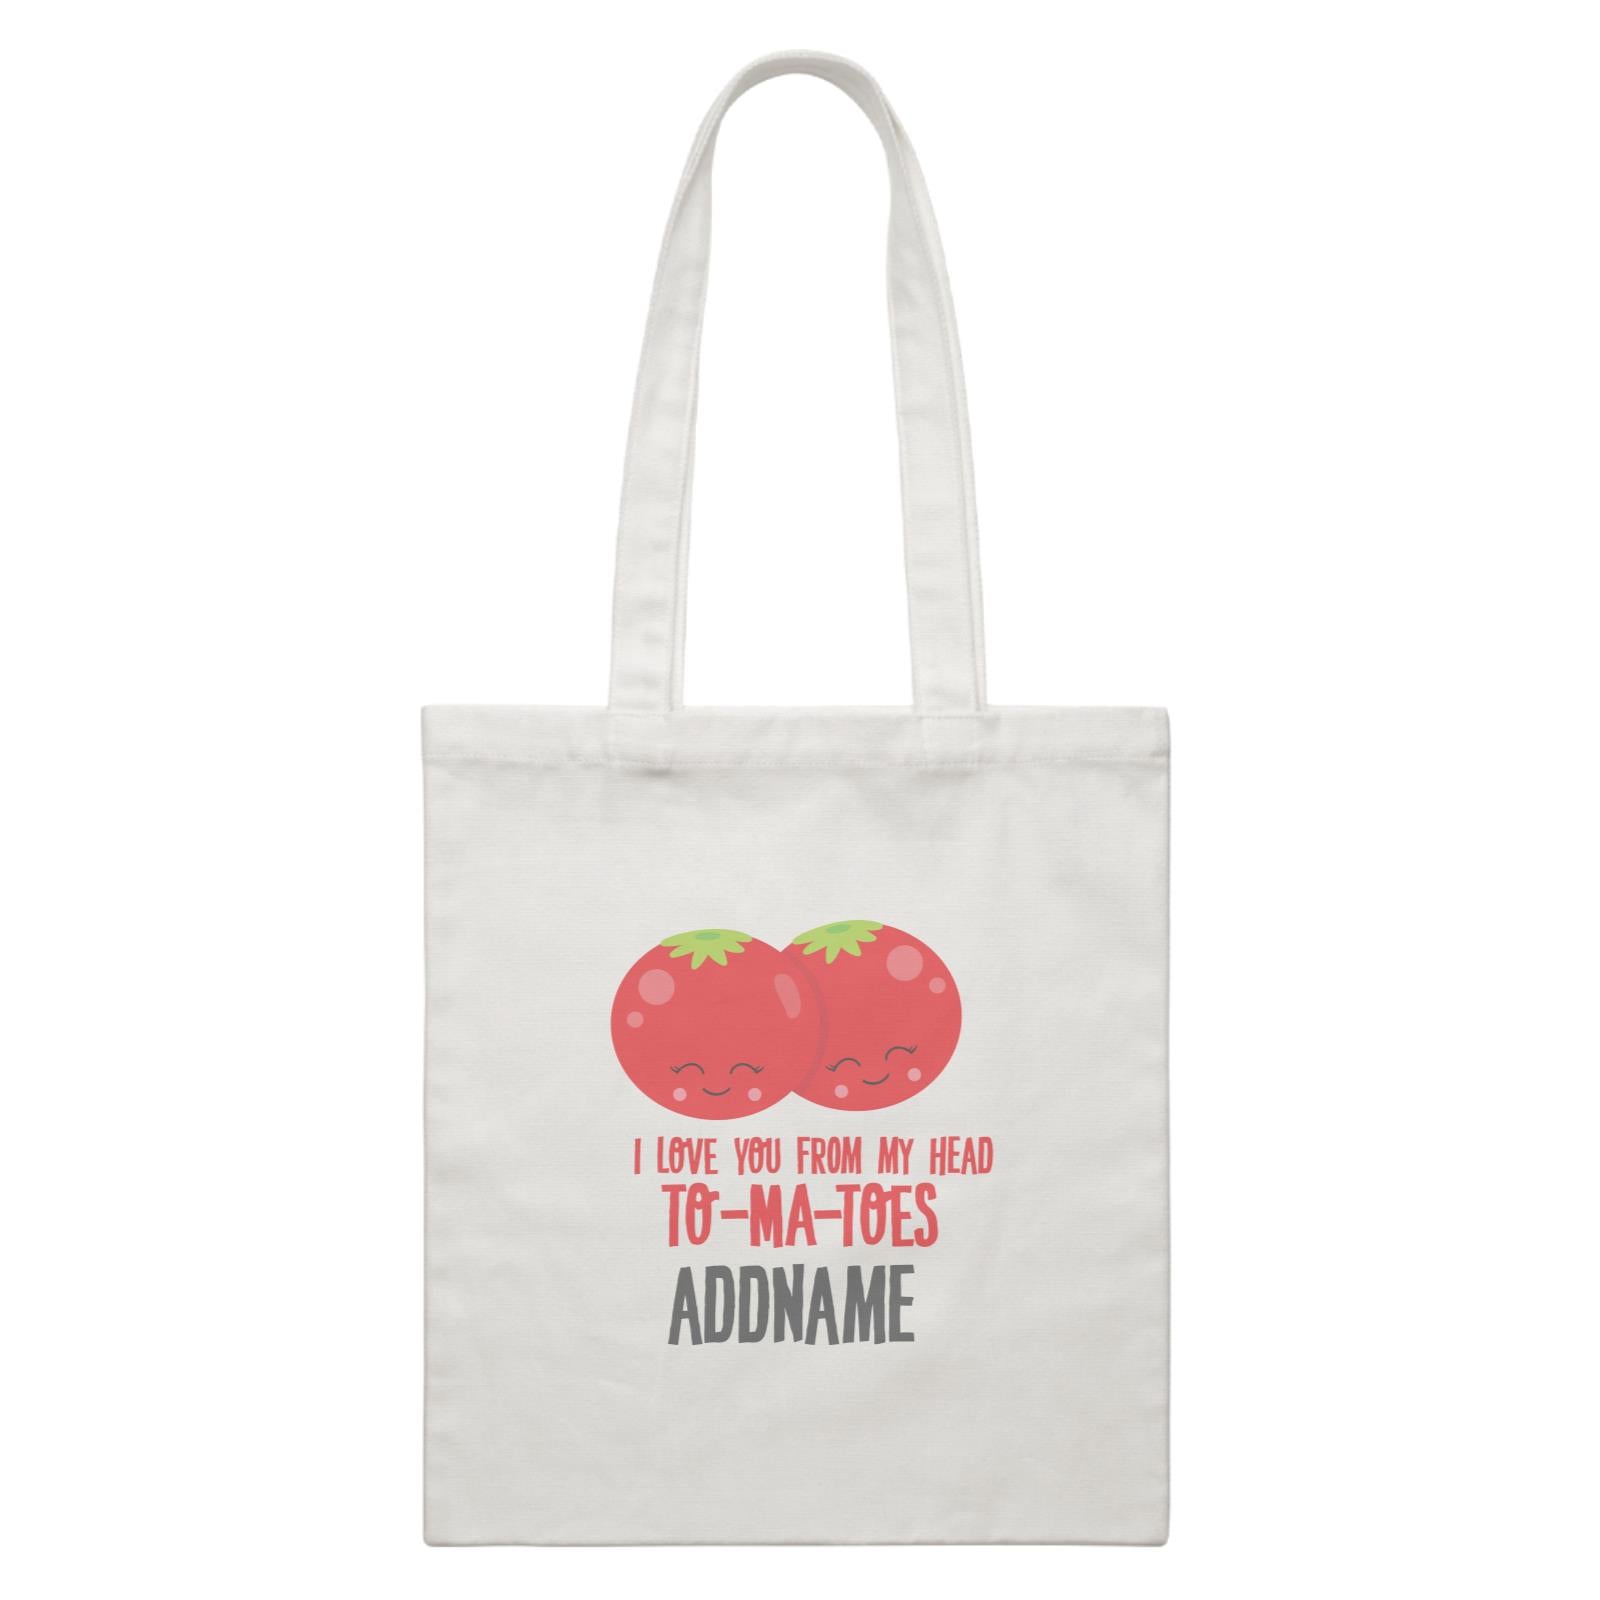 Love Food Puns I Love You From My Head TOMATOES Addname White Canvas Bag